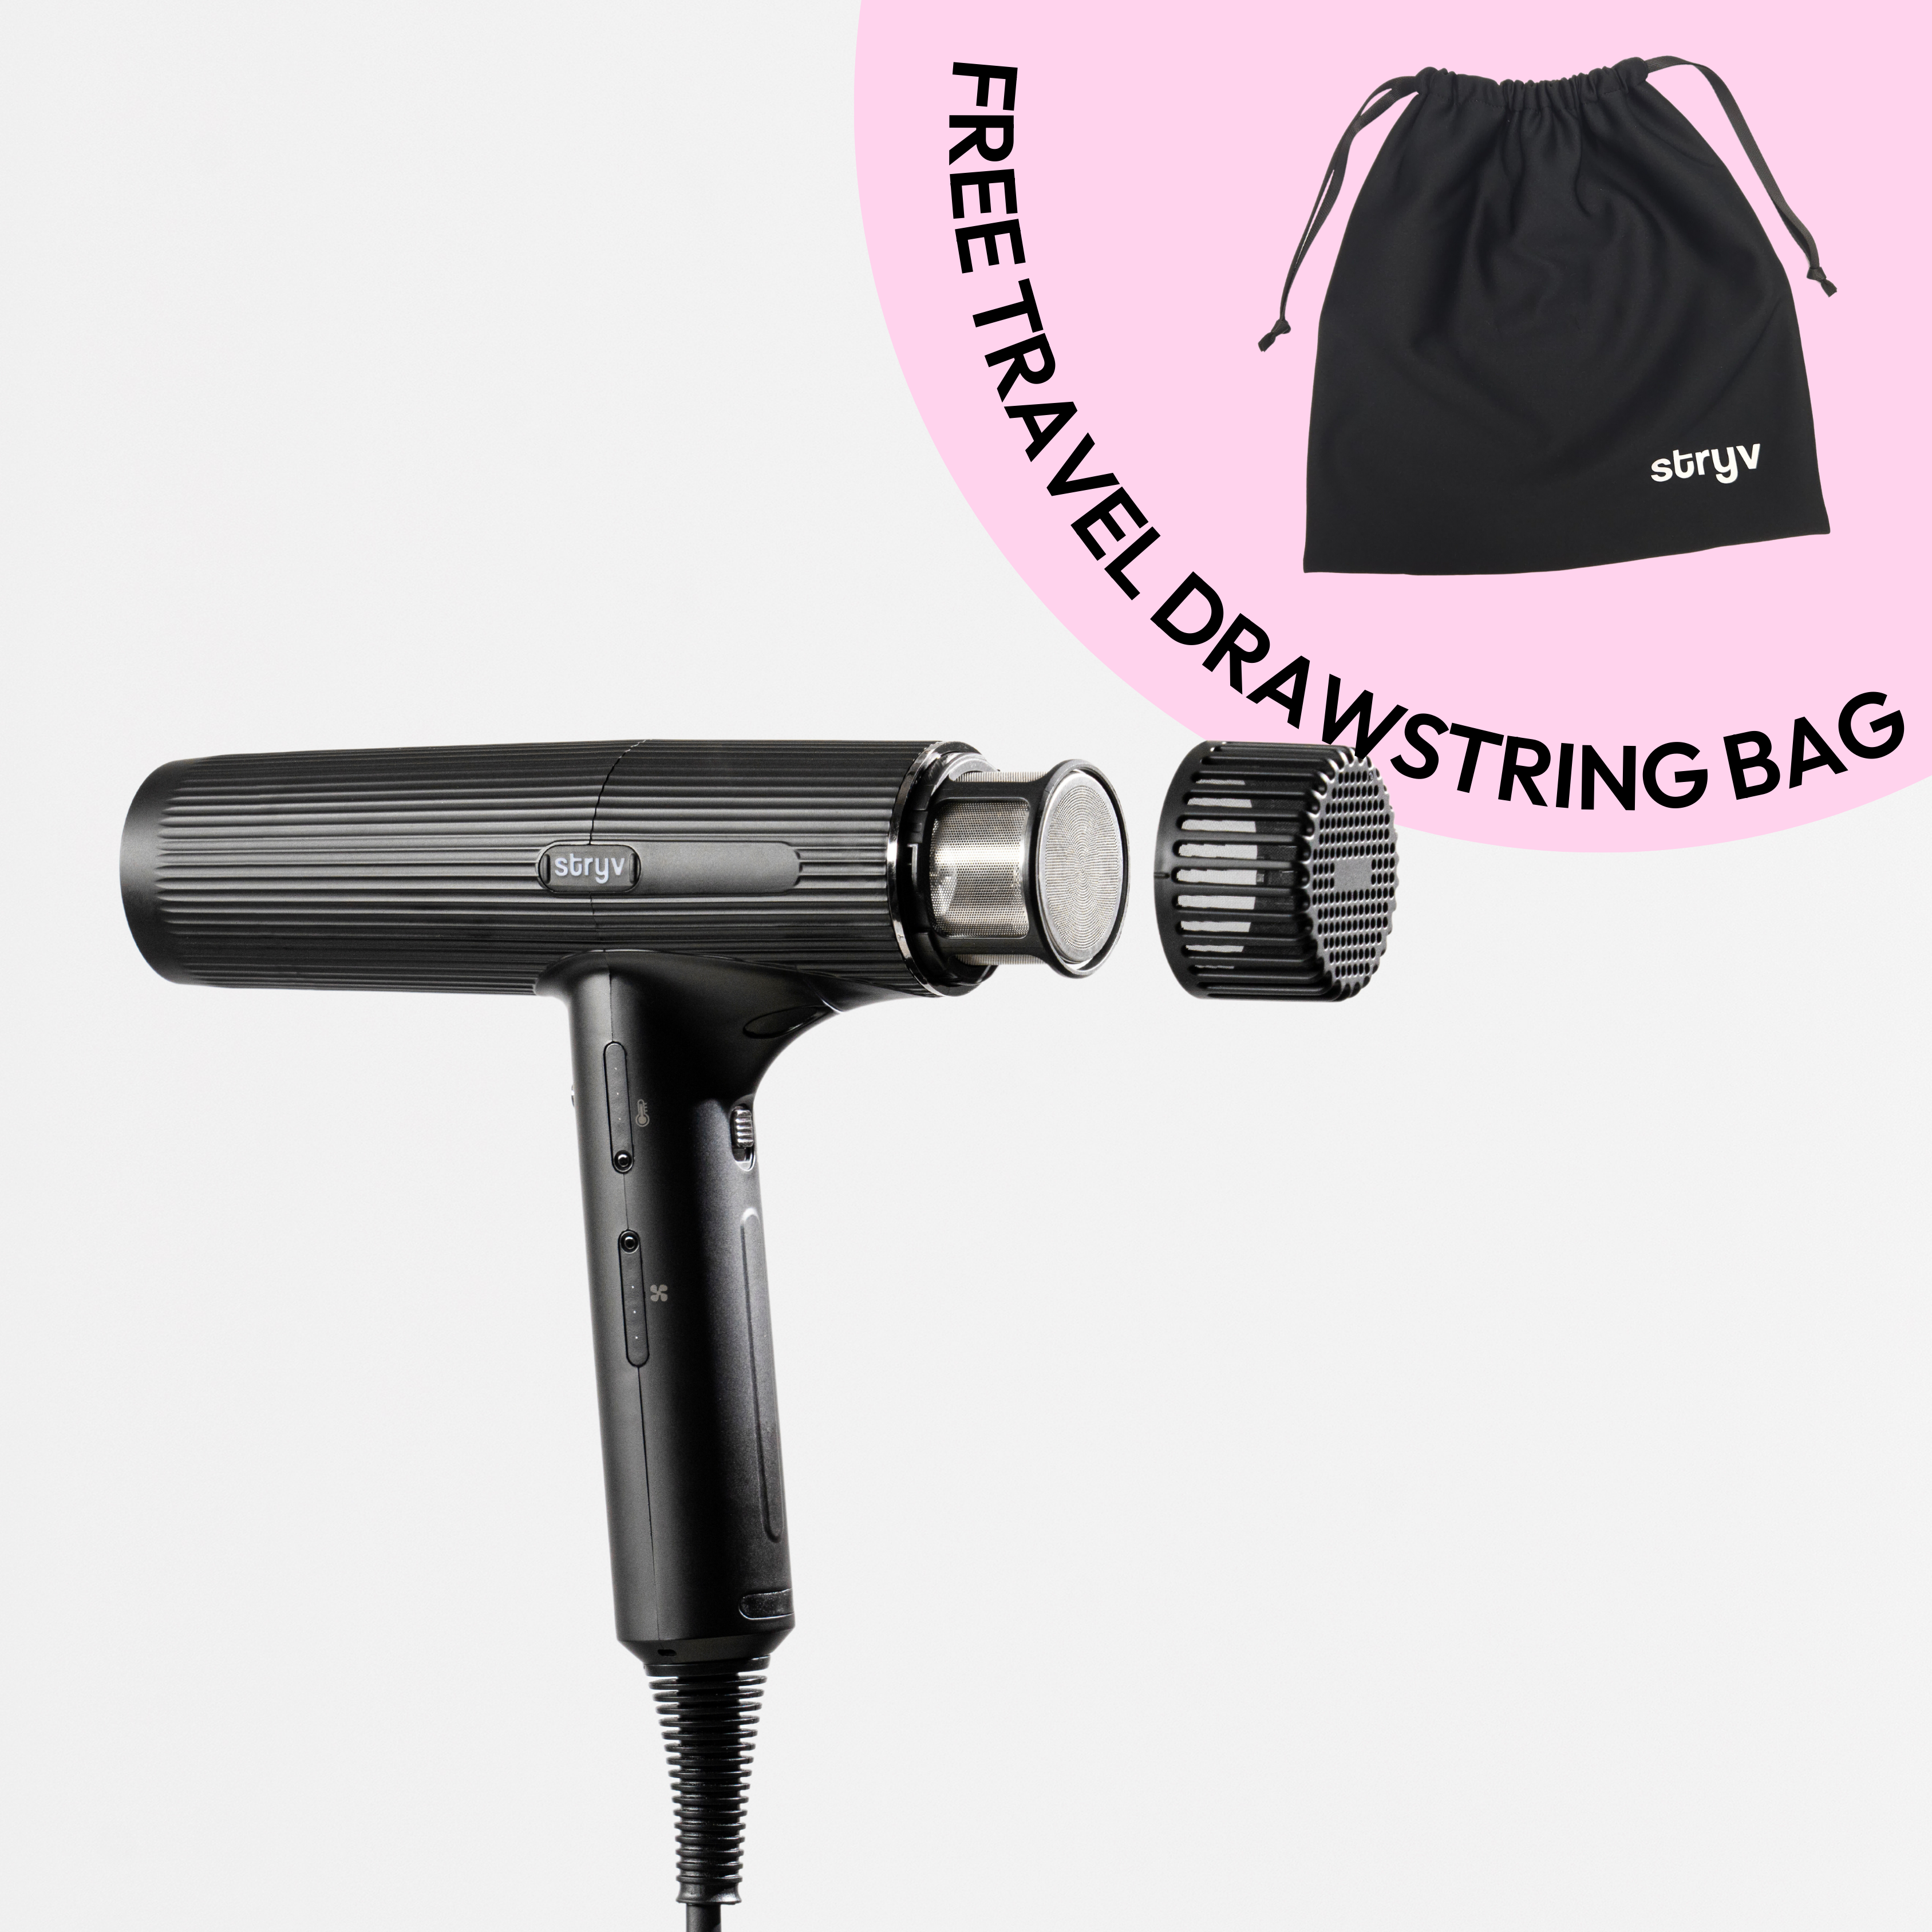 12.12 Special: Stryv Professional Hair Dryer  + FREE Travel Bag